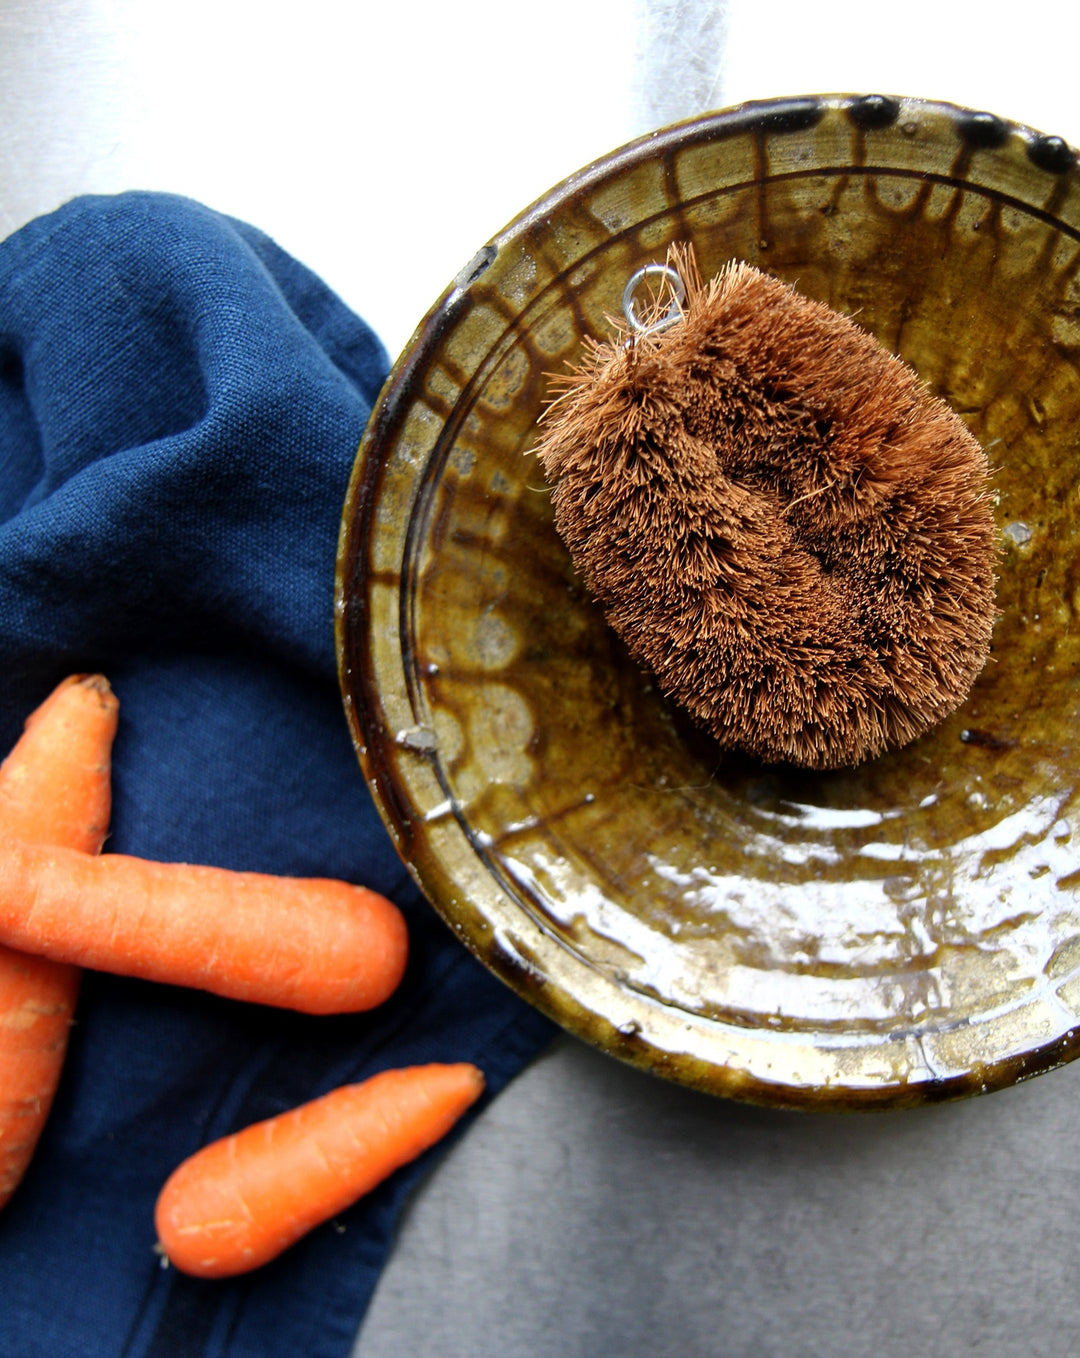 redecker coconut fibre brush for cleaning vegetables, say in a tamagroute pottery bowl with t-towel and scattered carrots.